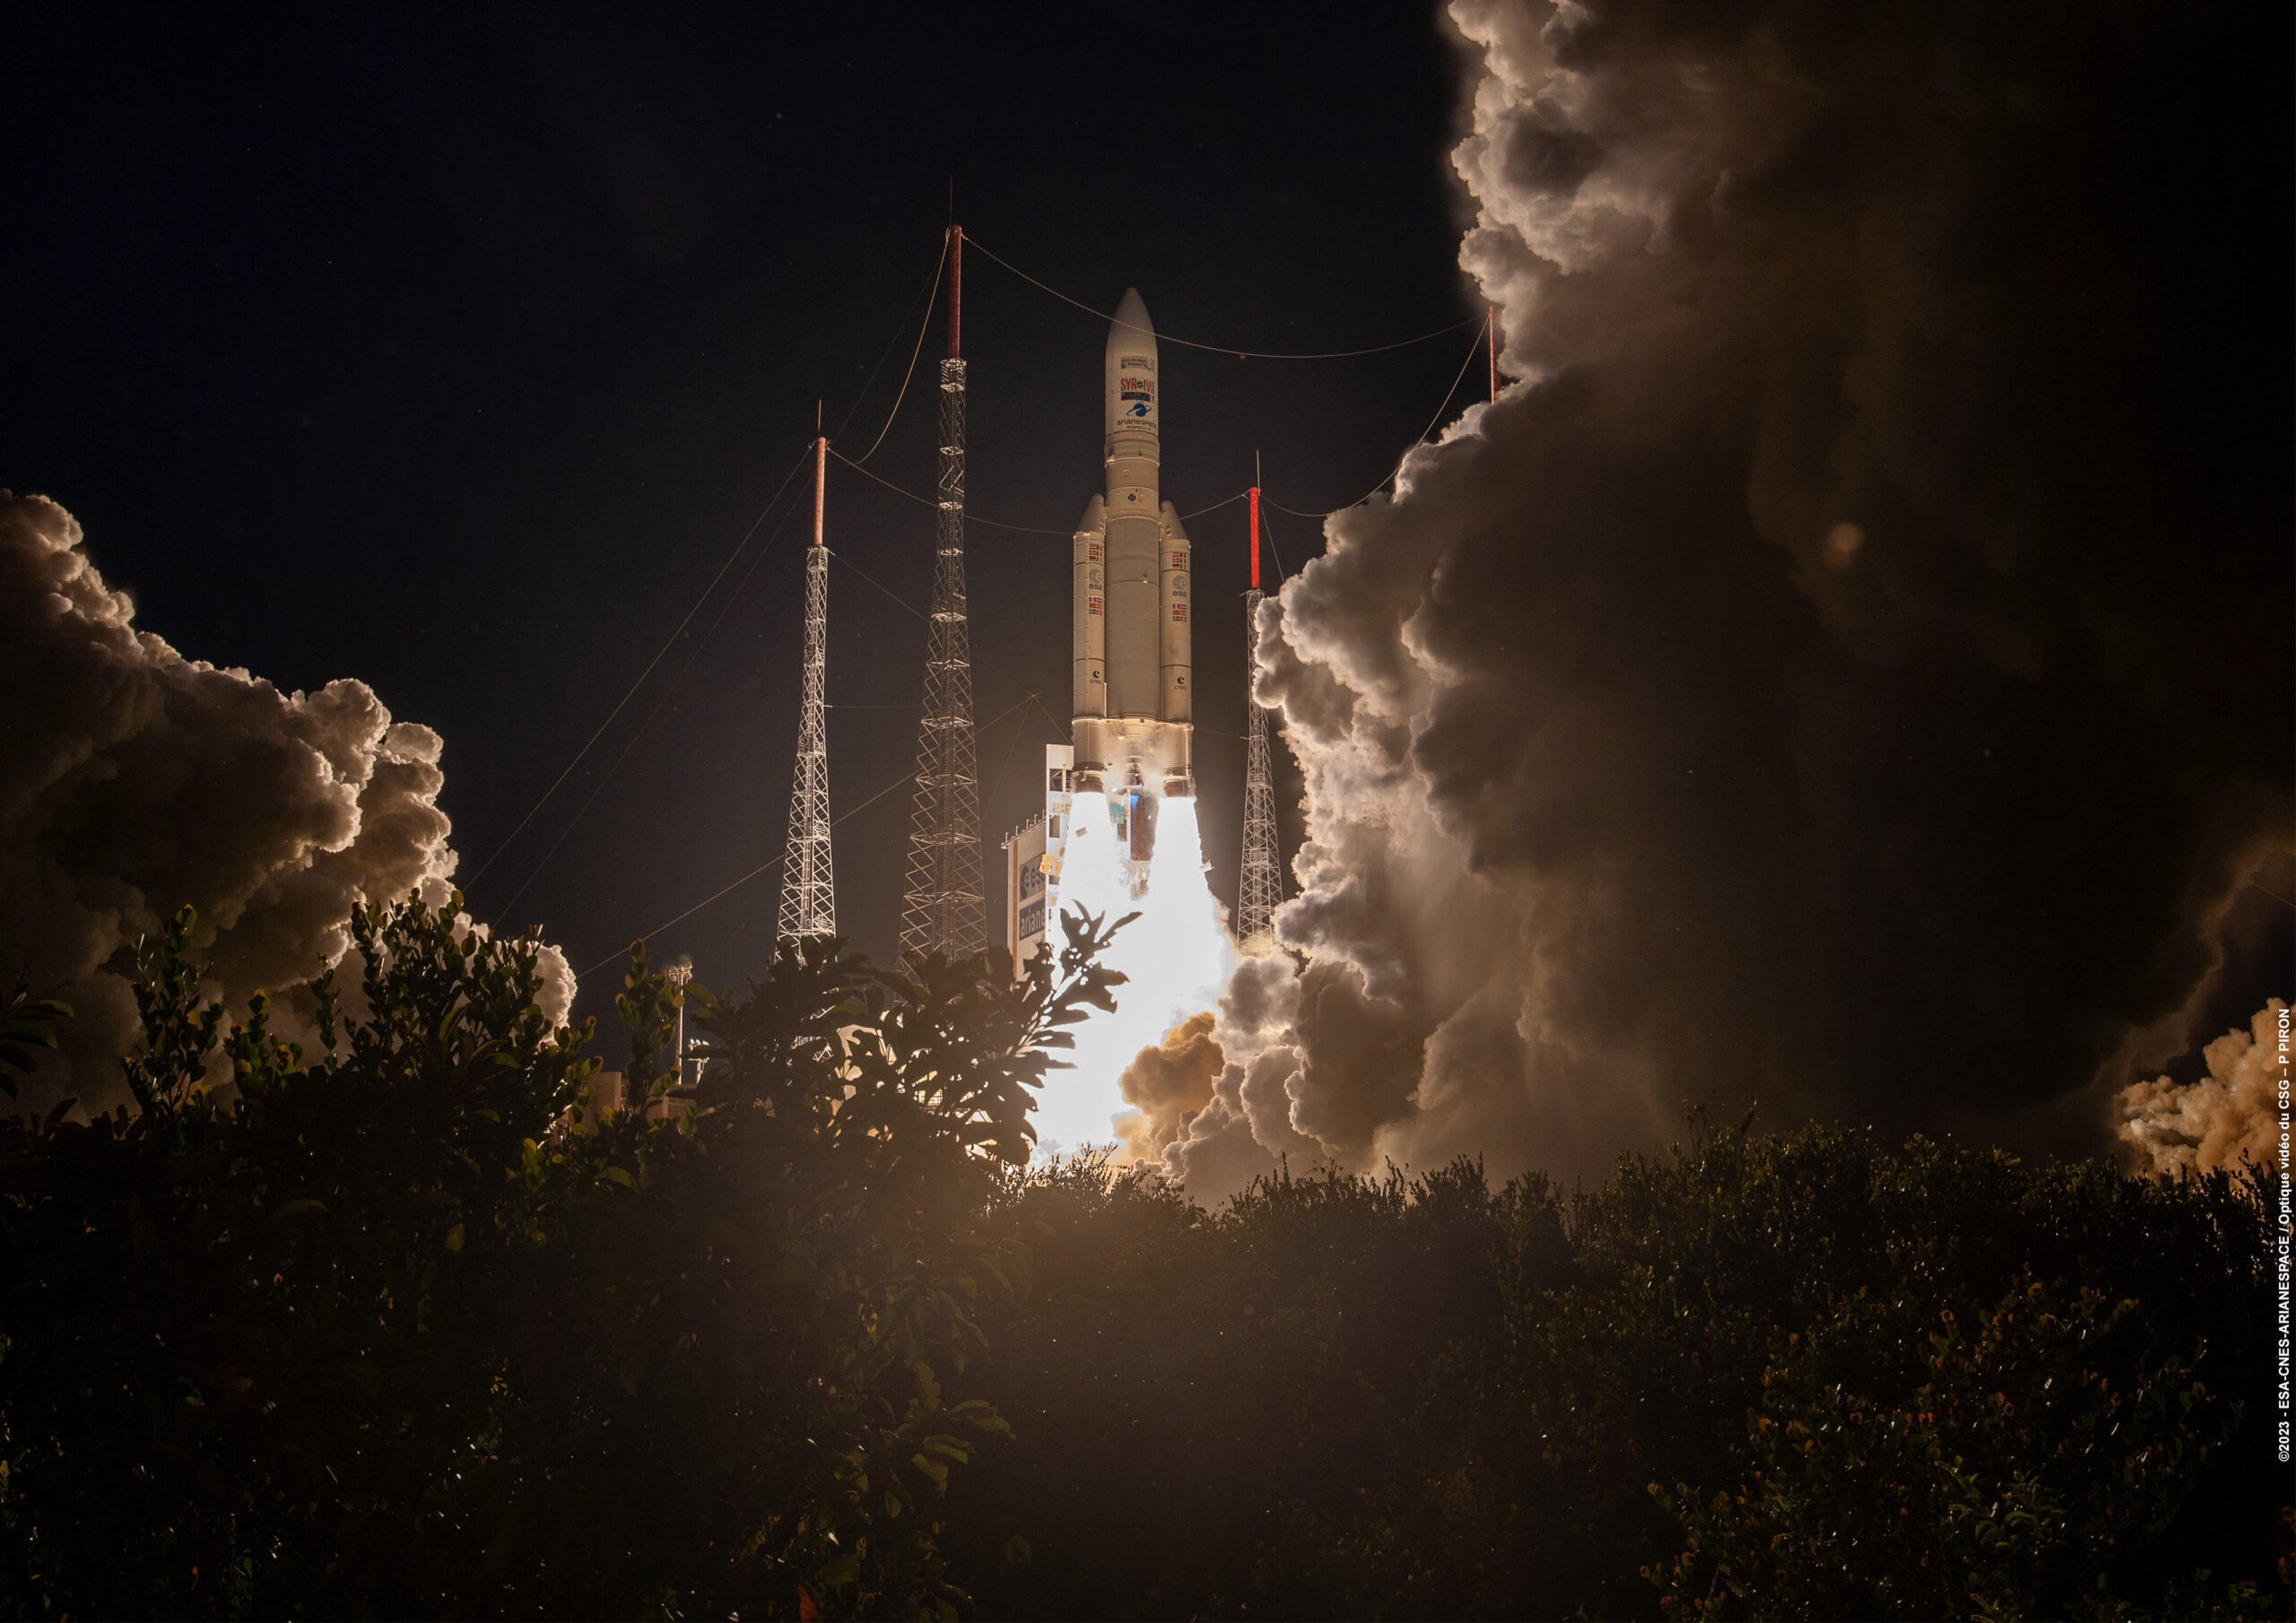 The last Ariane 5 launch ended with success